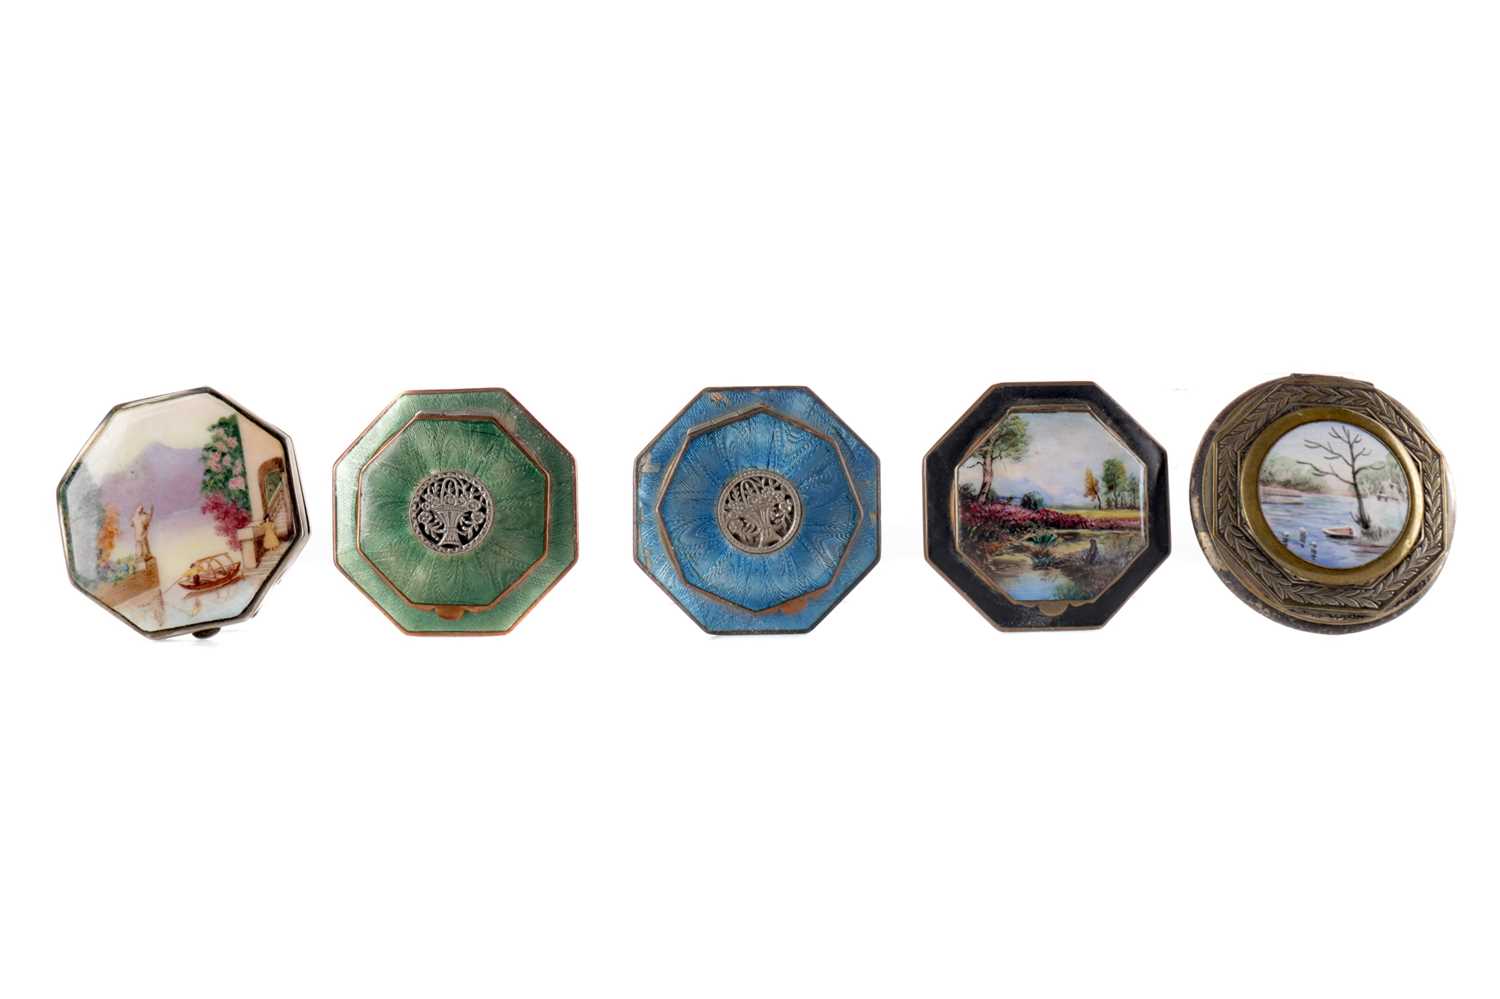 Lot 1715 - A VOGUE SILVER AND ENAMEL OCTAGONAL COMPACT AND FOUR OTHERS